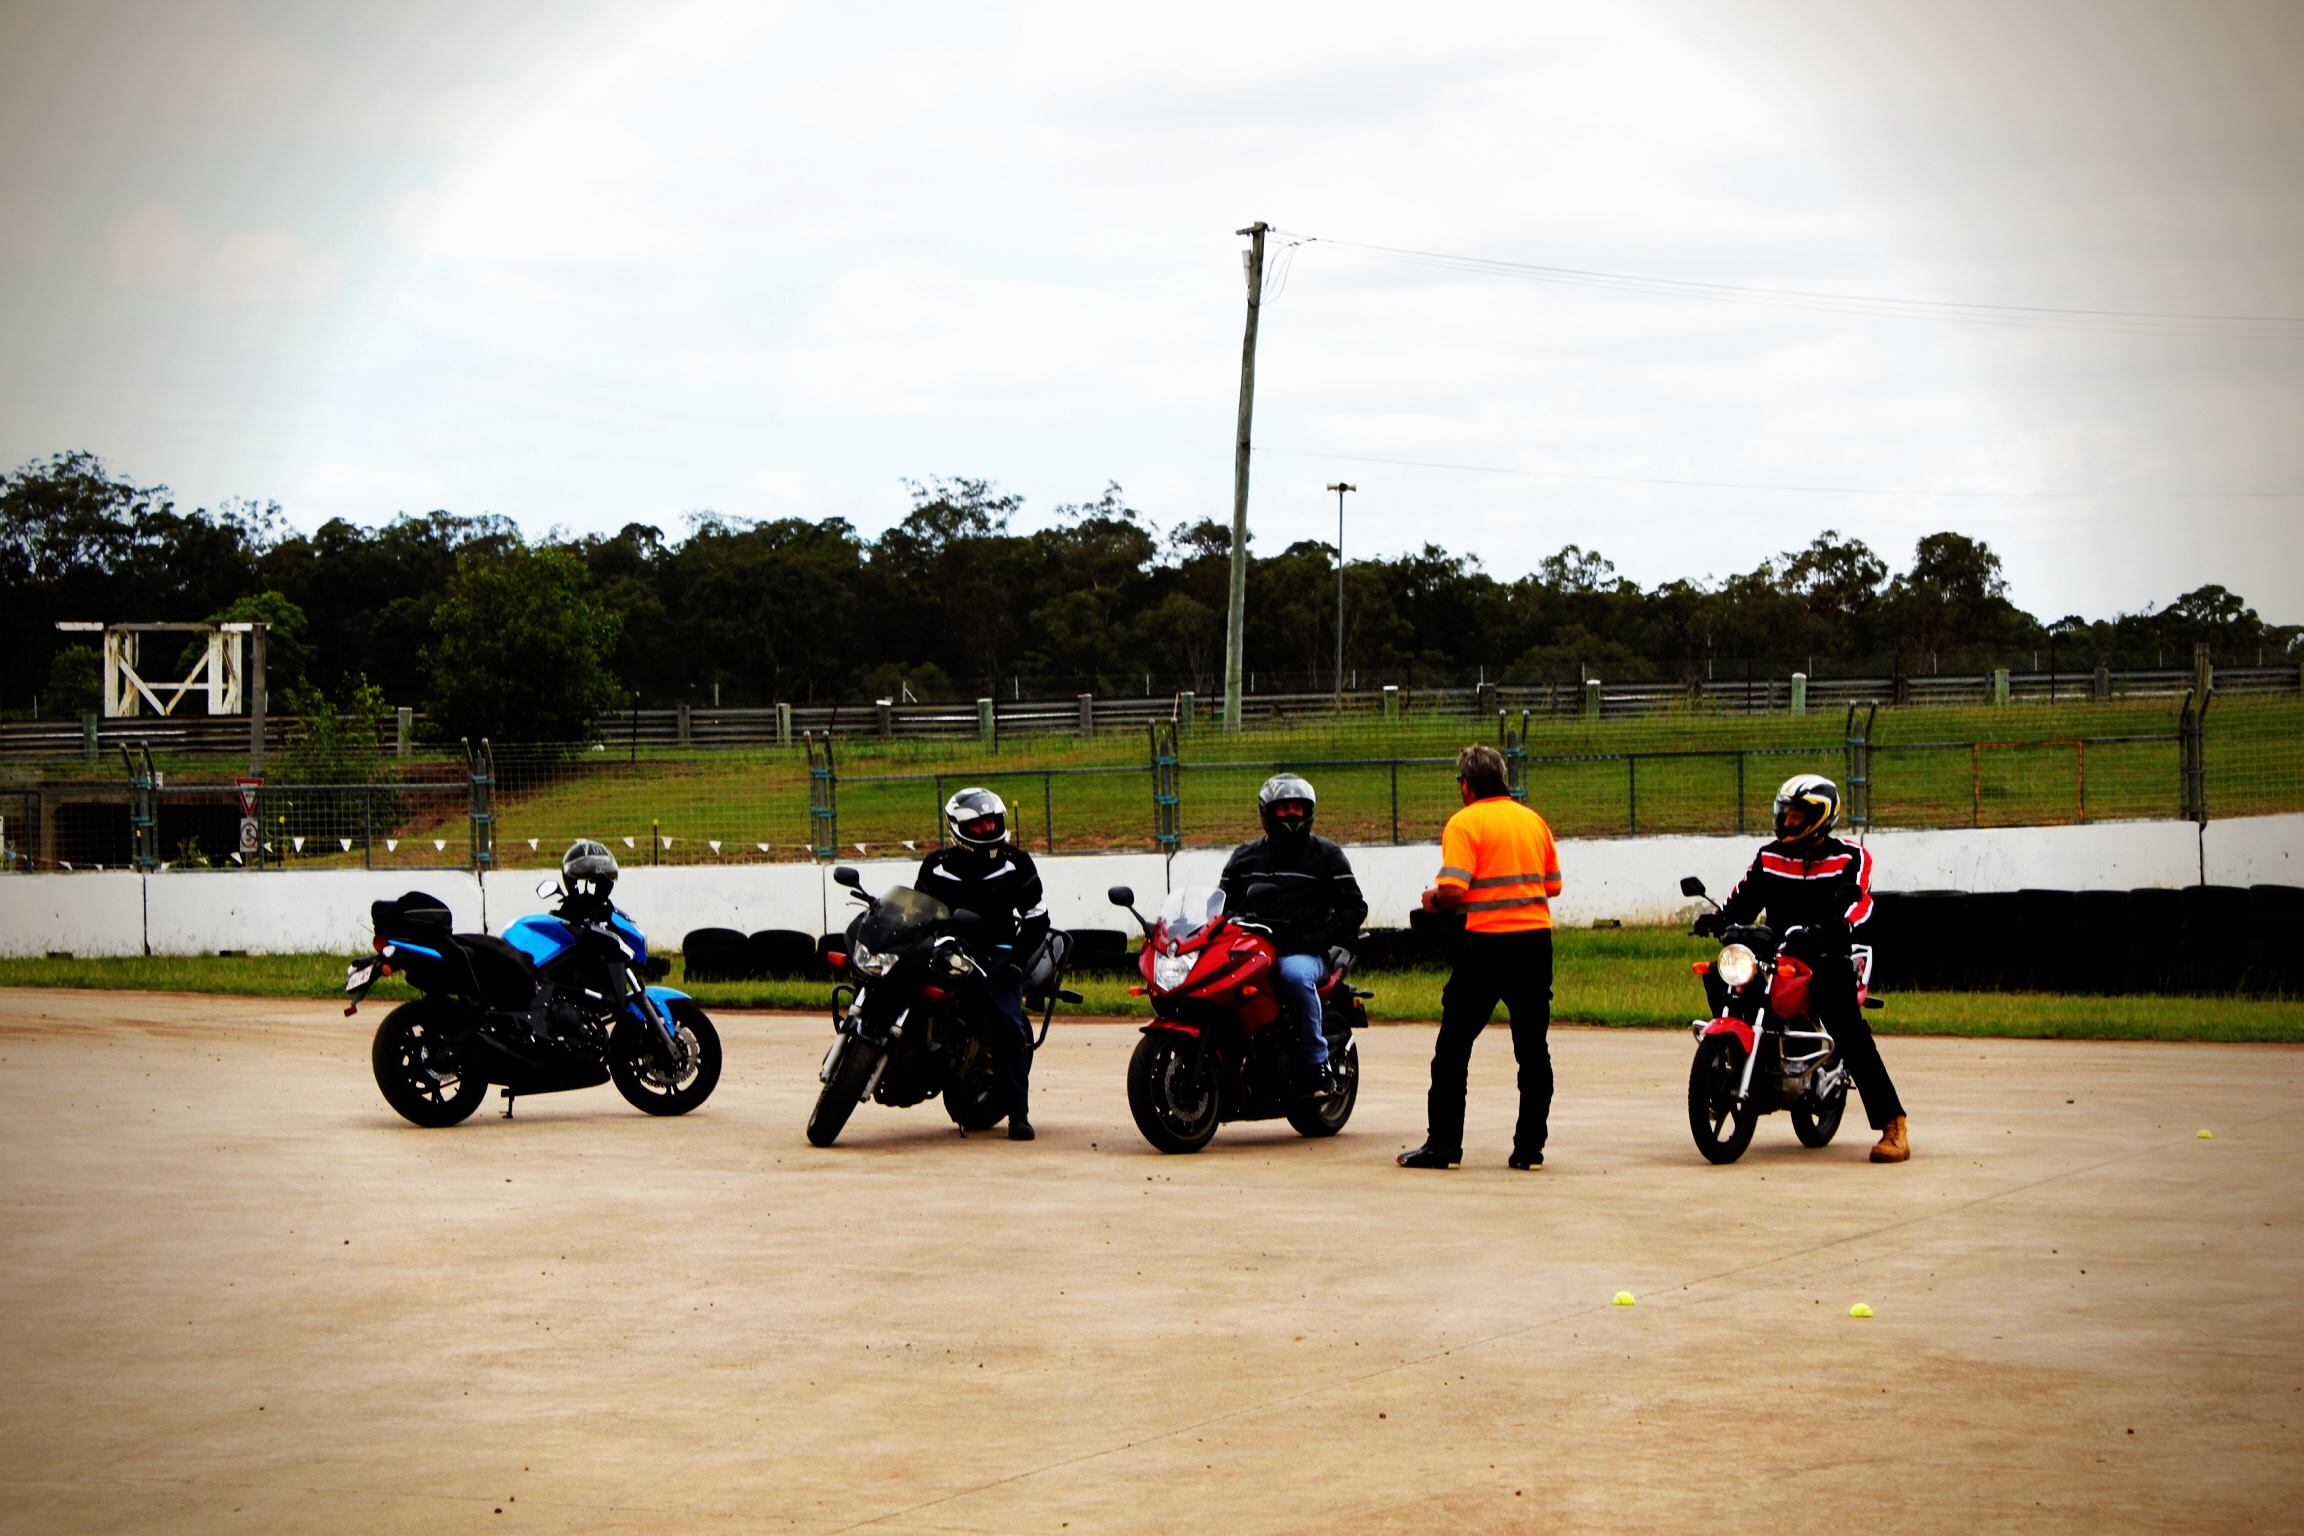 How to get a motorcycle licence in Queensland Qld.